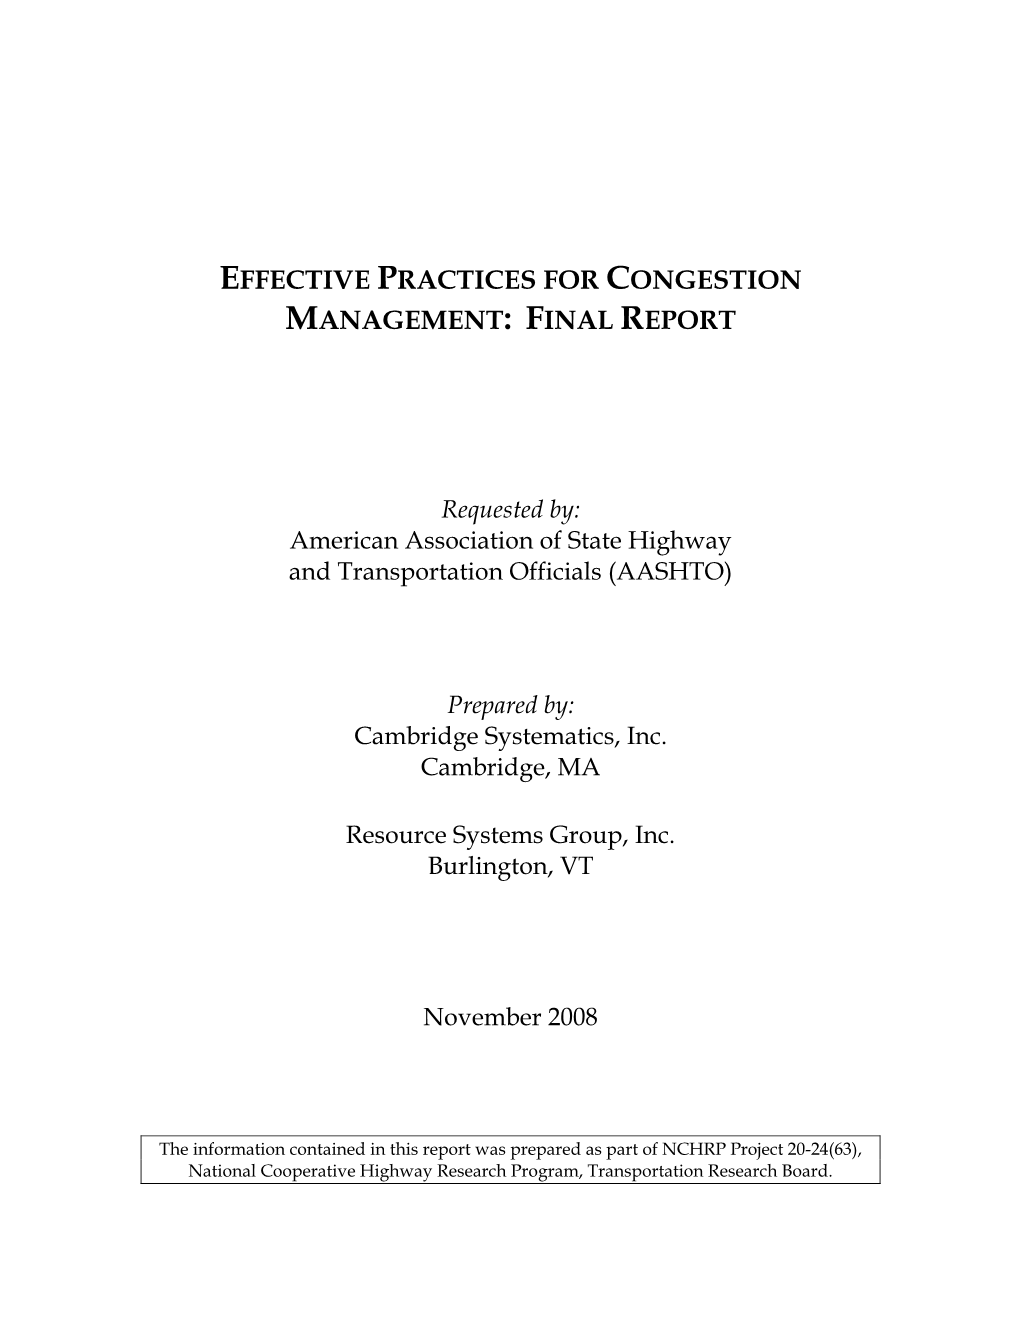 Effective Strategies for Congestion Management